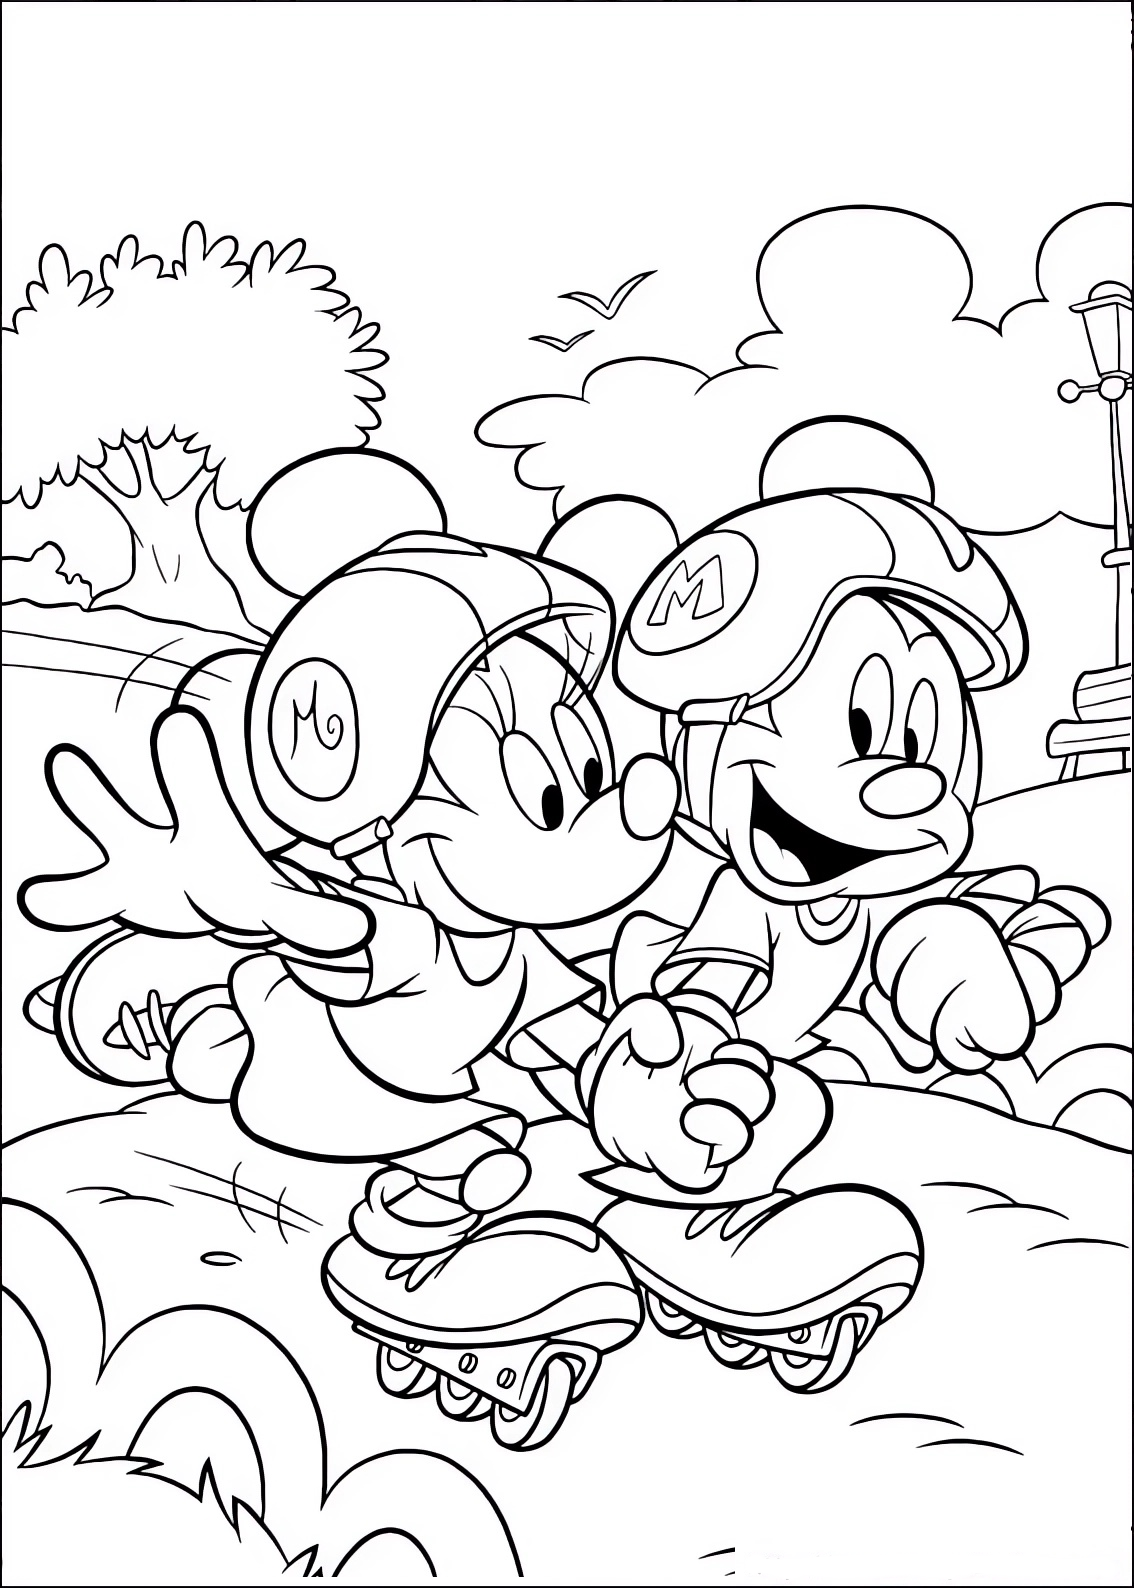 Coloring page of Minnie and Mickey Mouse with roller skates